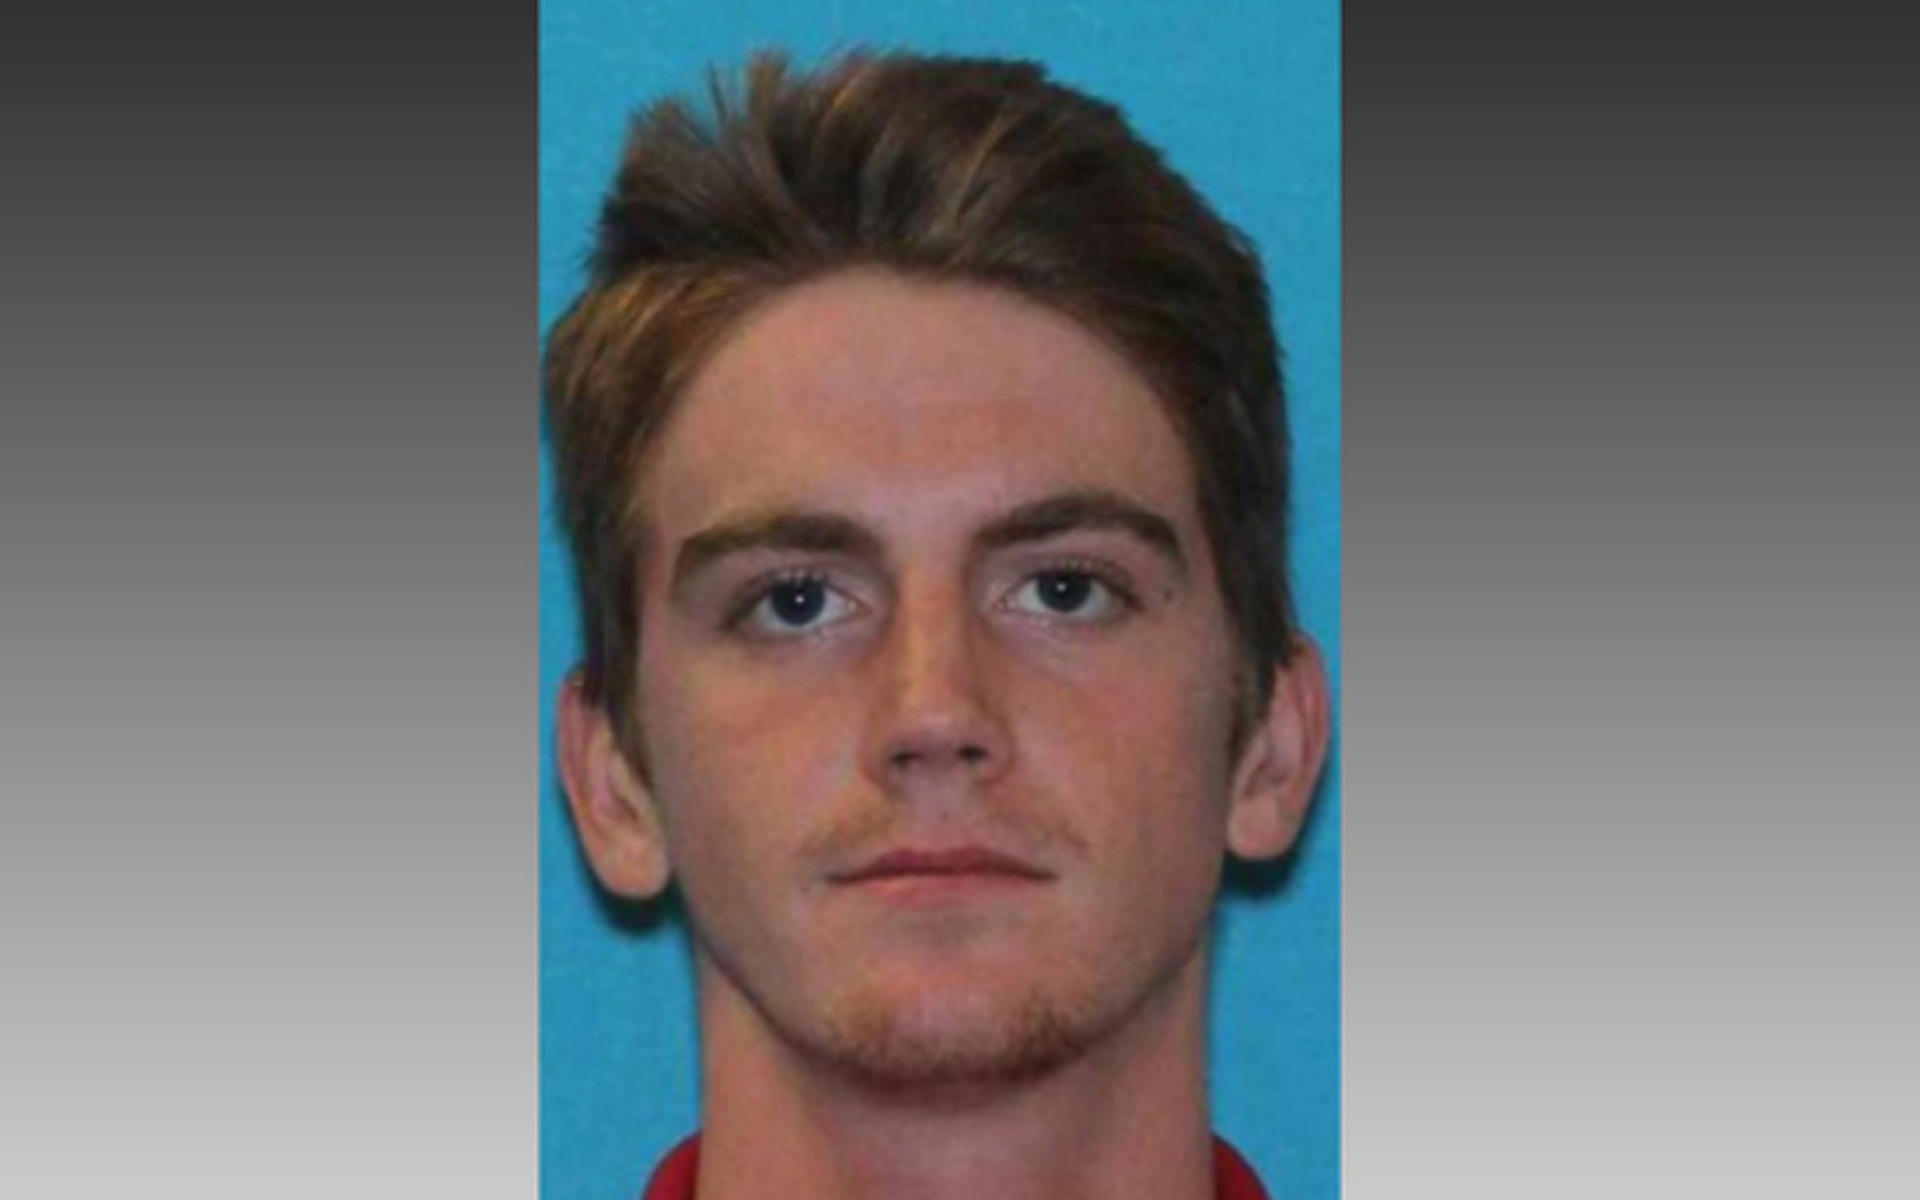 Police ID young man hit by vehicle near Texas Tech campus in Lubbock, Texas